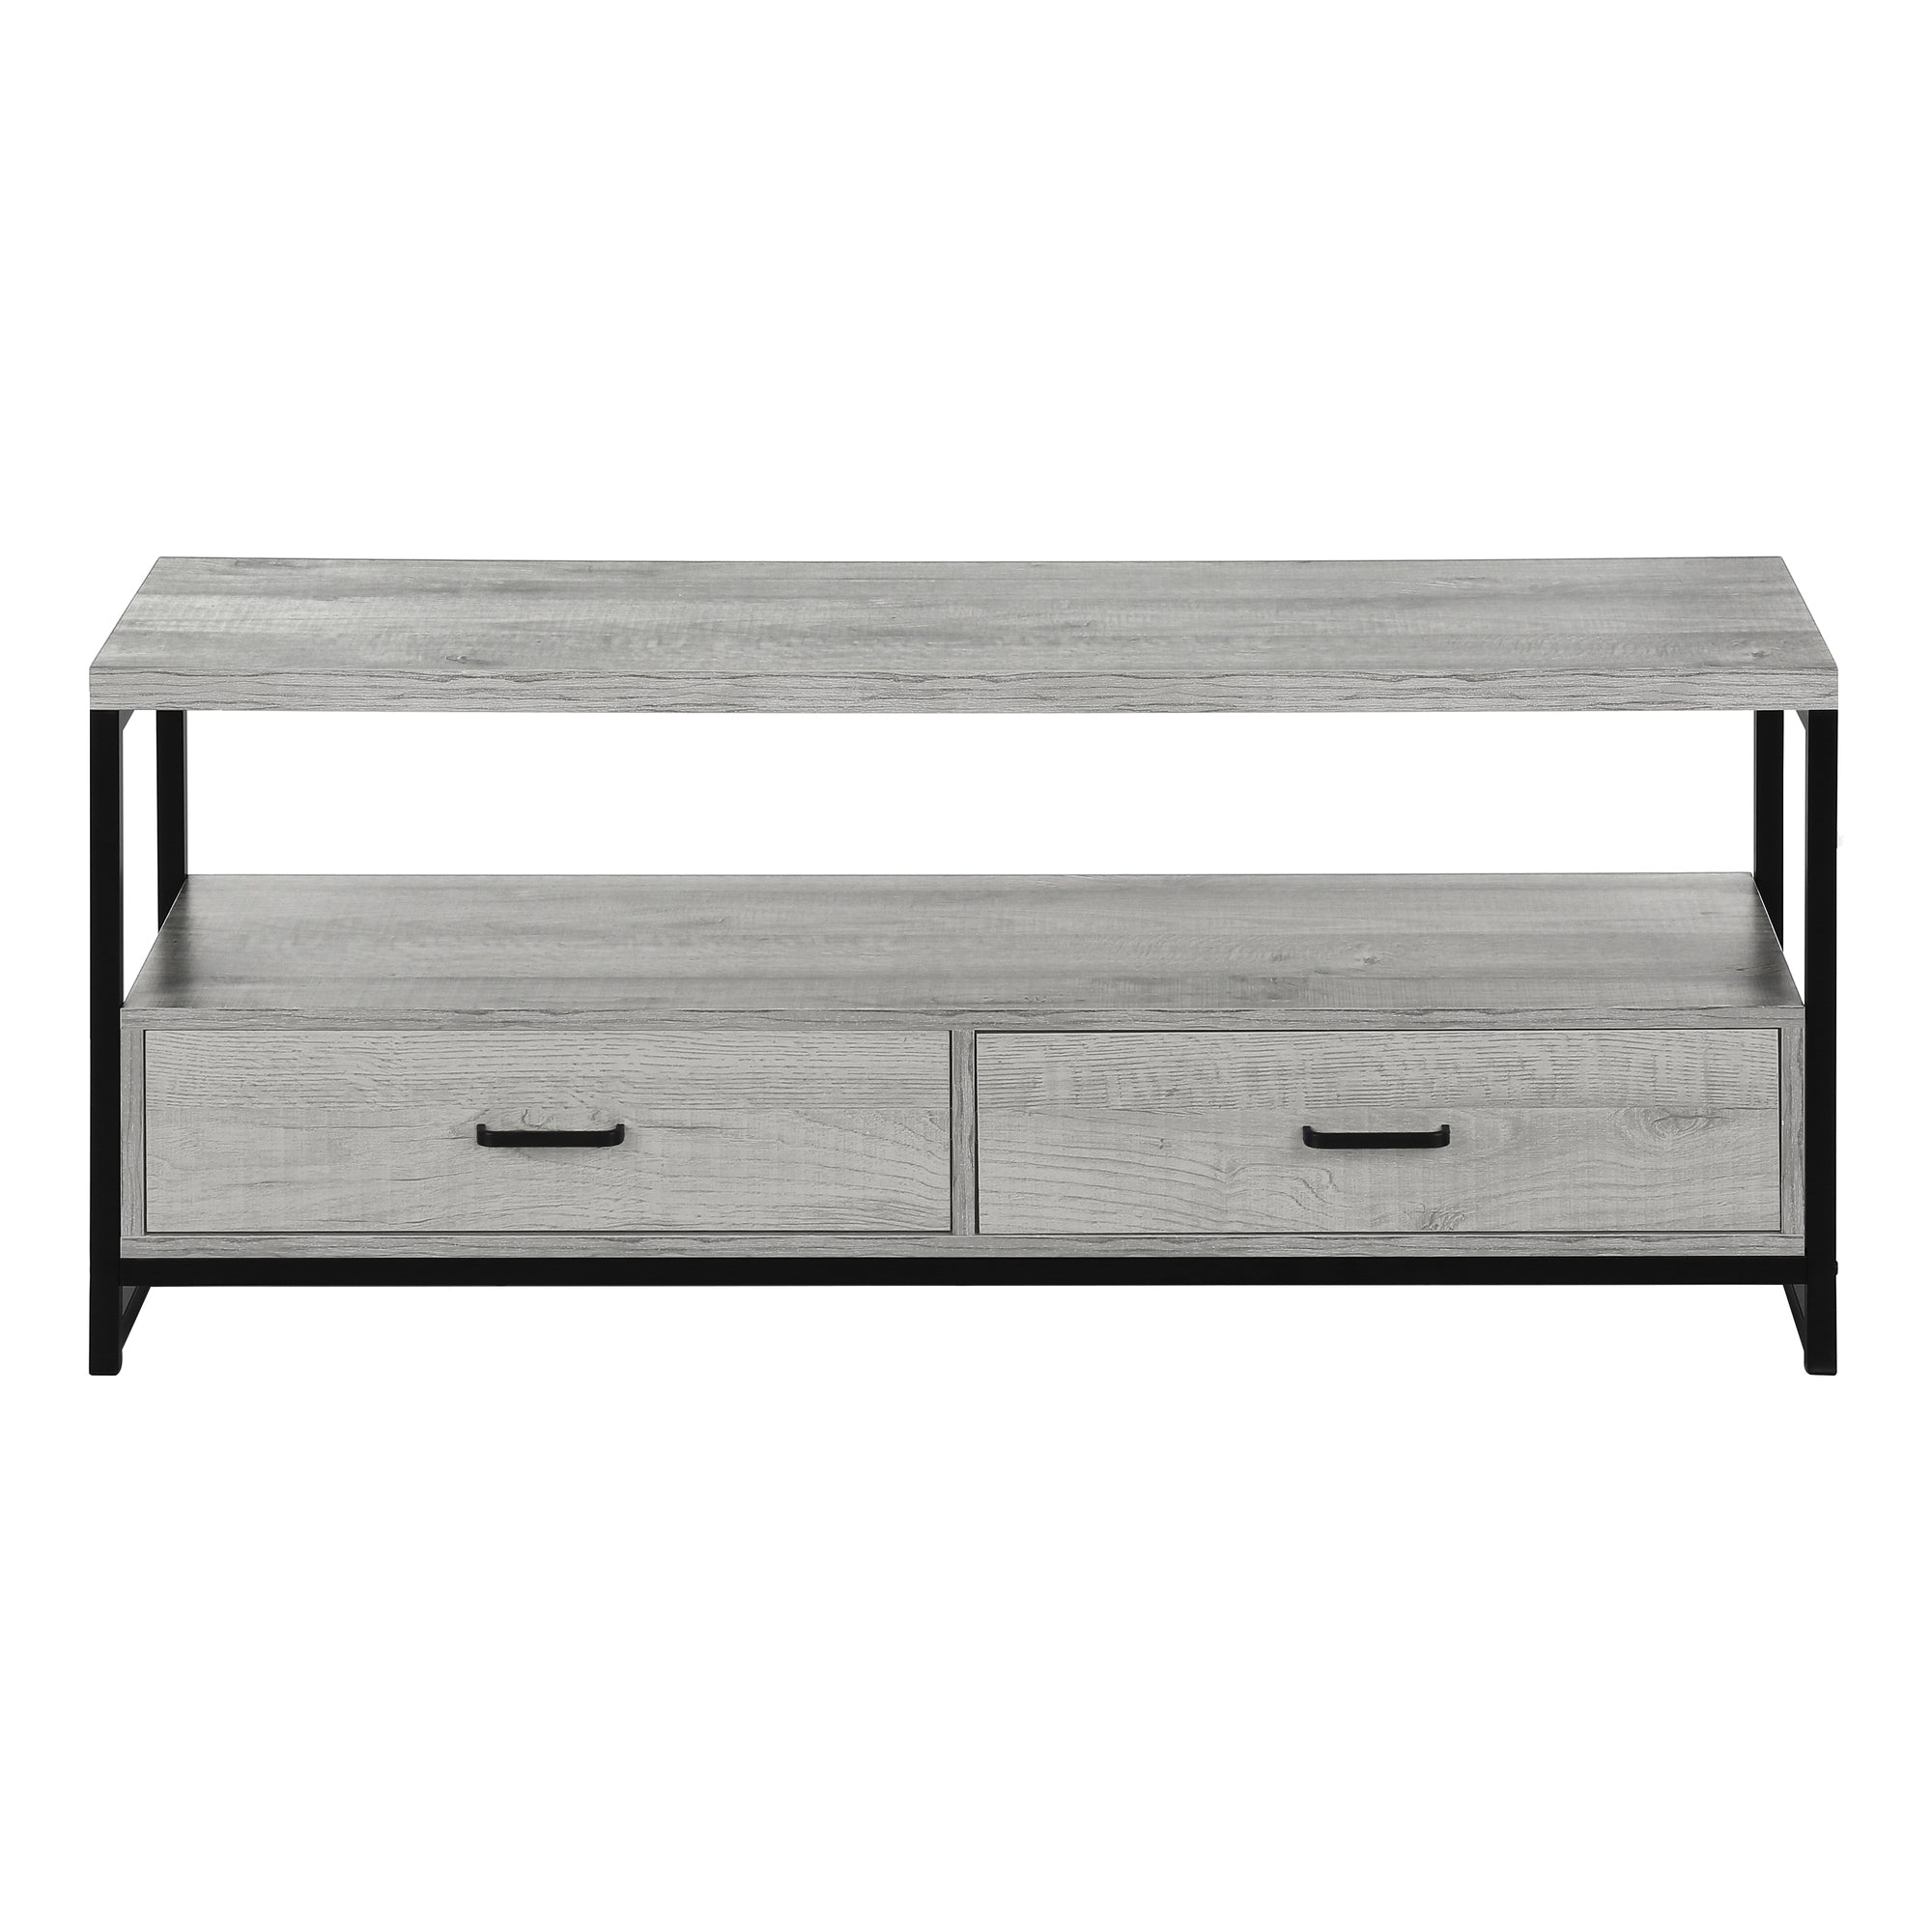 MN-682871    Tv Stand, 48 Inch, Console, Media Entertainment Center, Storage Cabinet, Living Room, Bedroom, Laminate, Metal, Grey, Contemporary, Modern